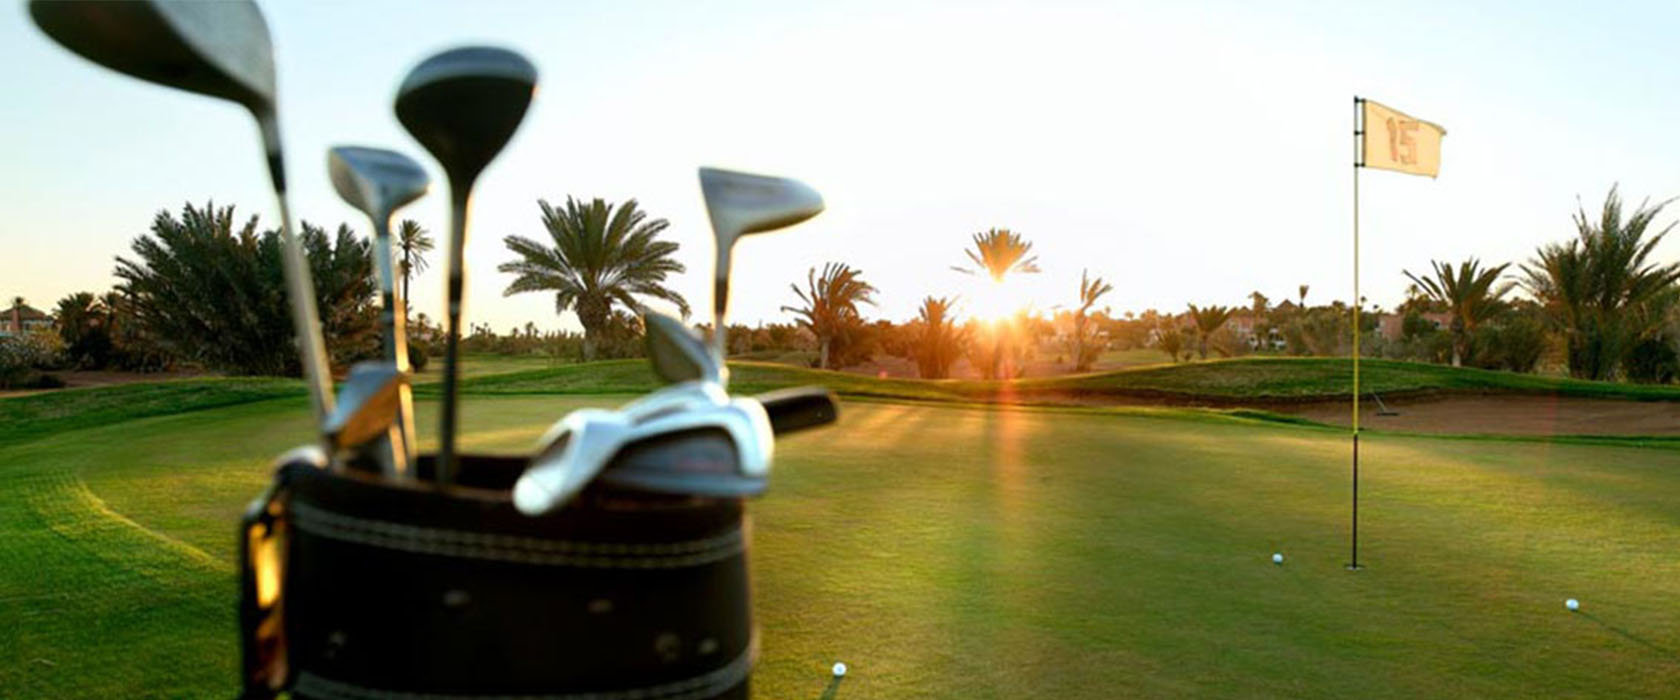 morocco Golf’s courses offer some of the most spectacular locations for golf, events and entertainment in the region.